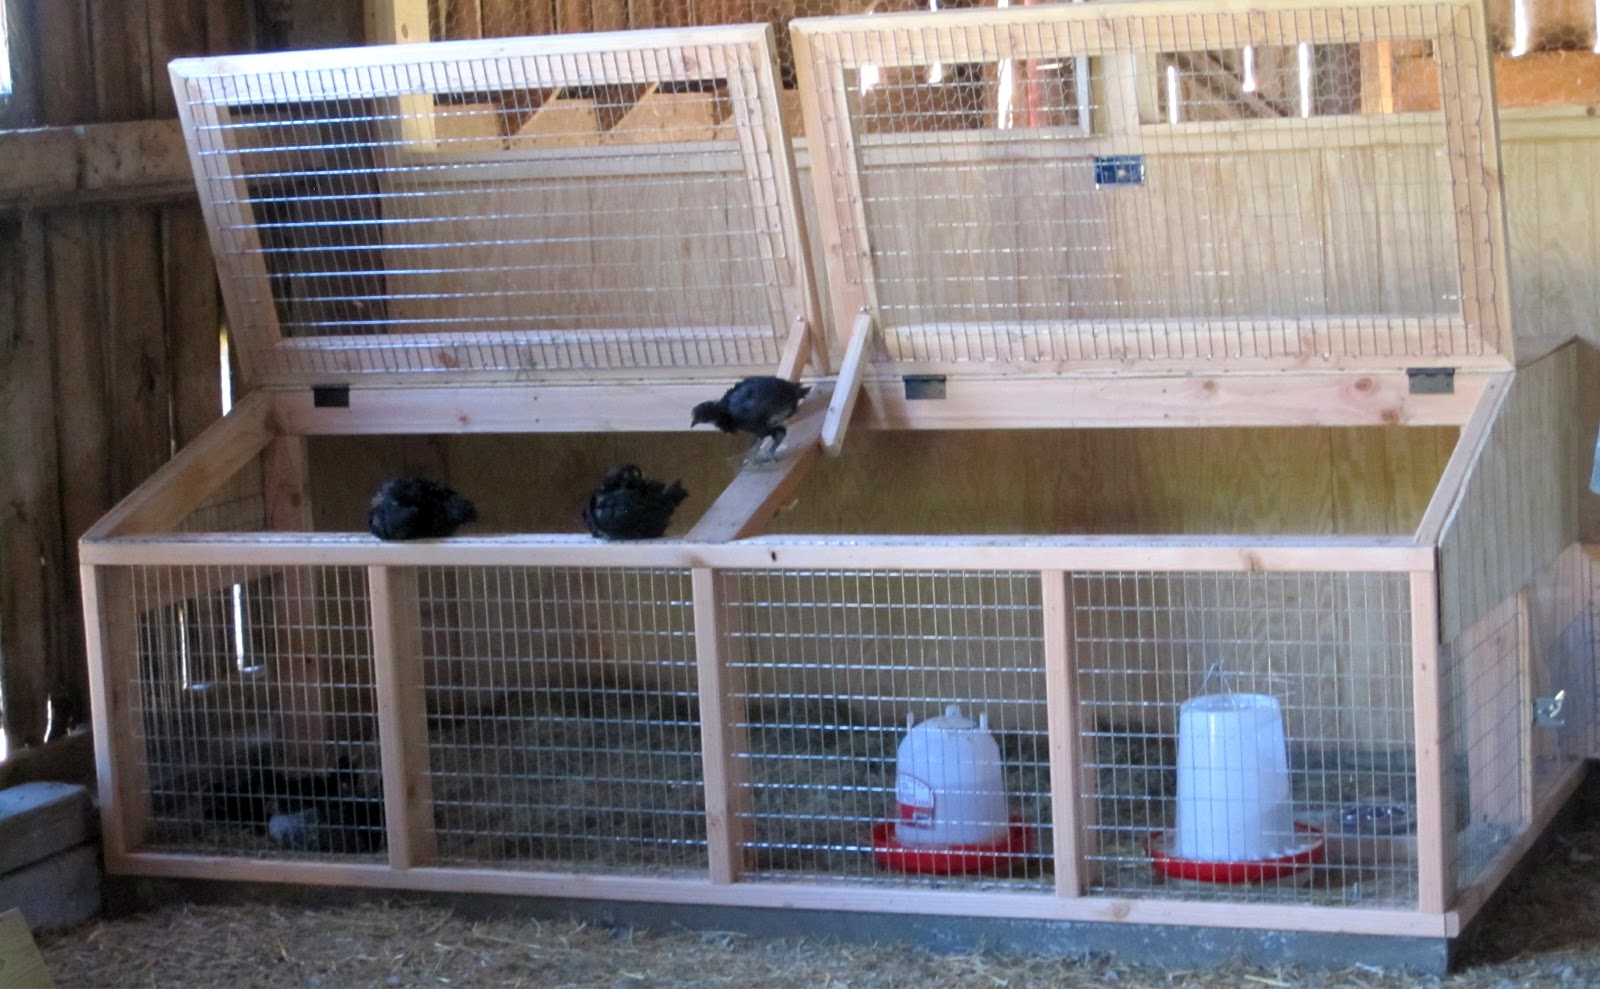  coop contains the turkeys and a big brooder box for chicks/poults